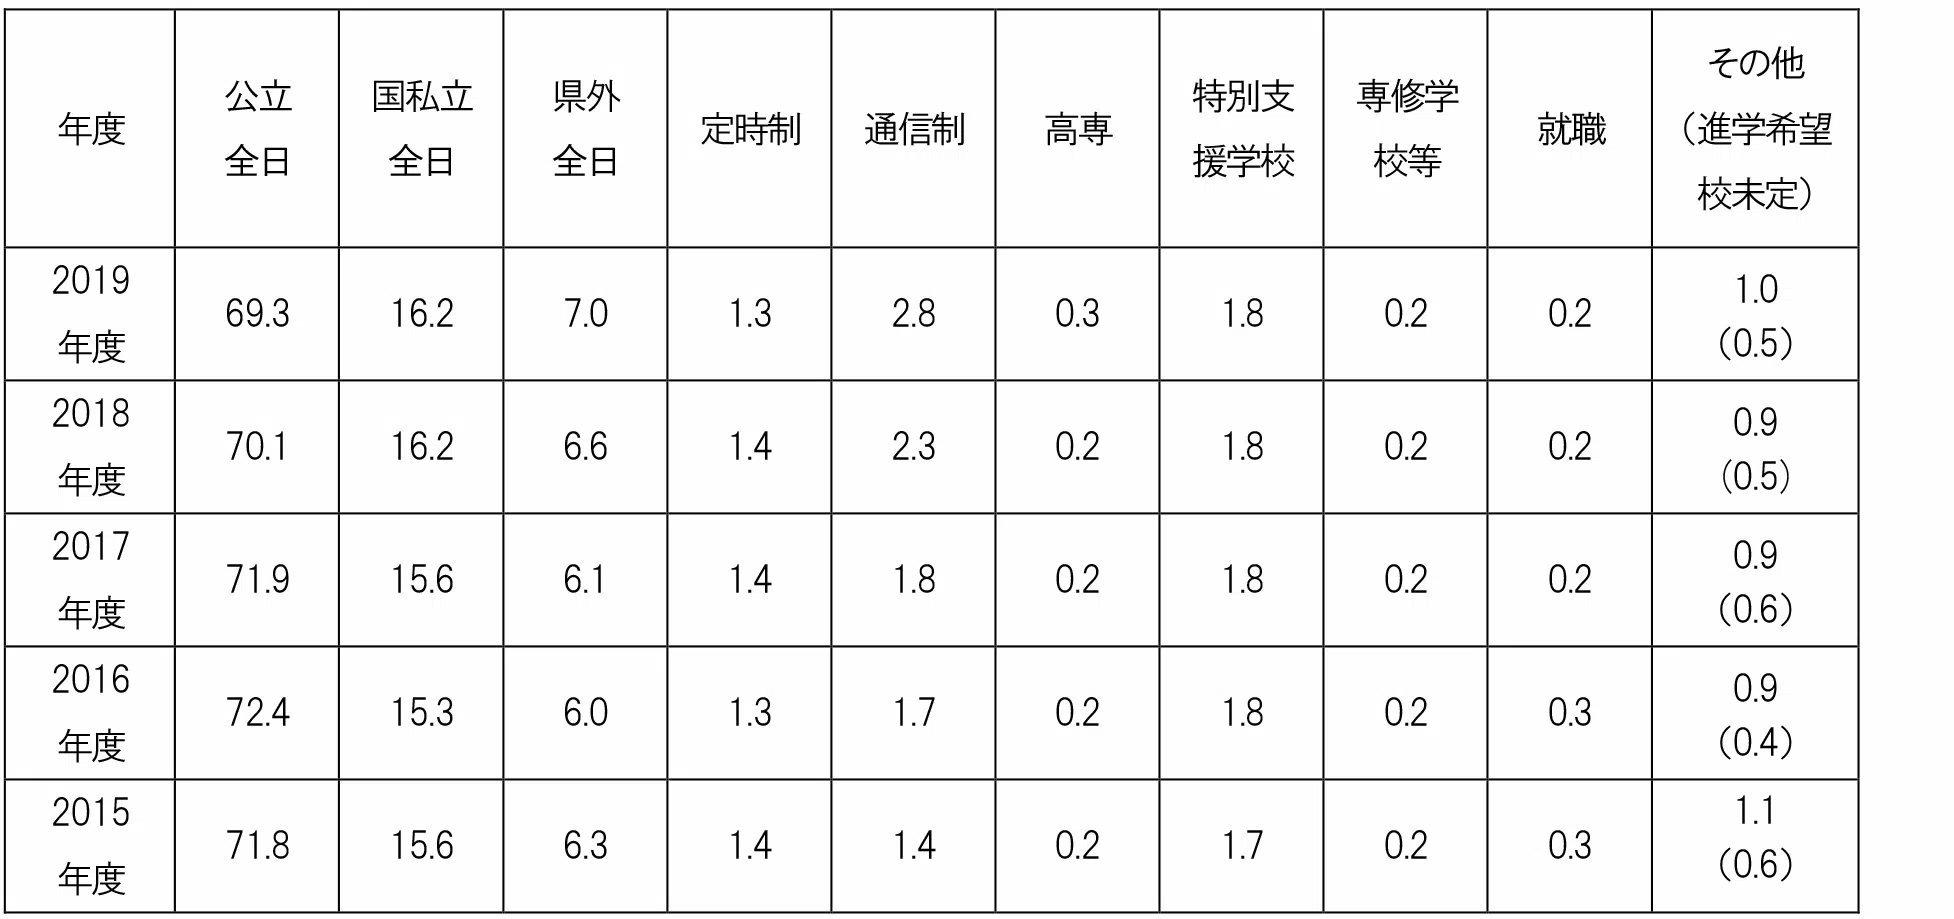 penrepo_s_201904_table1.png